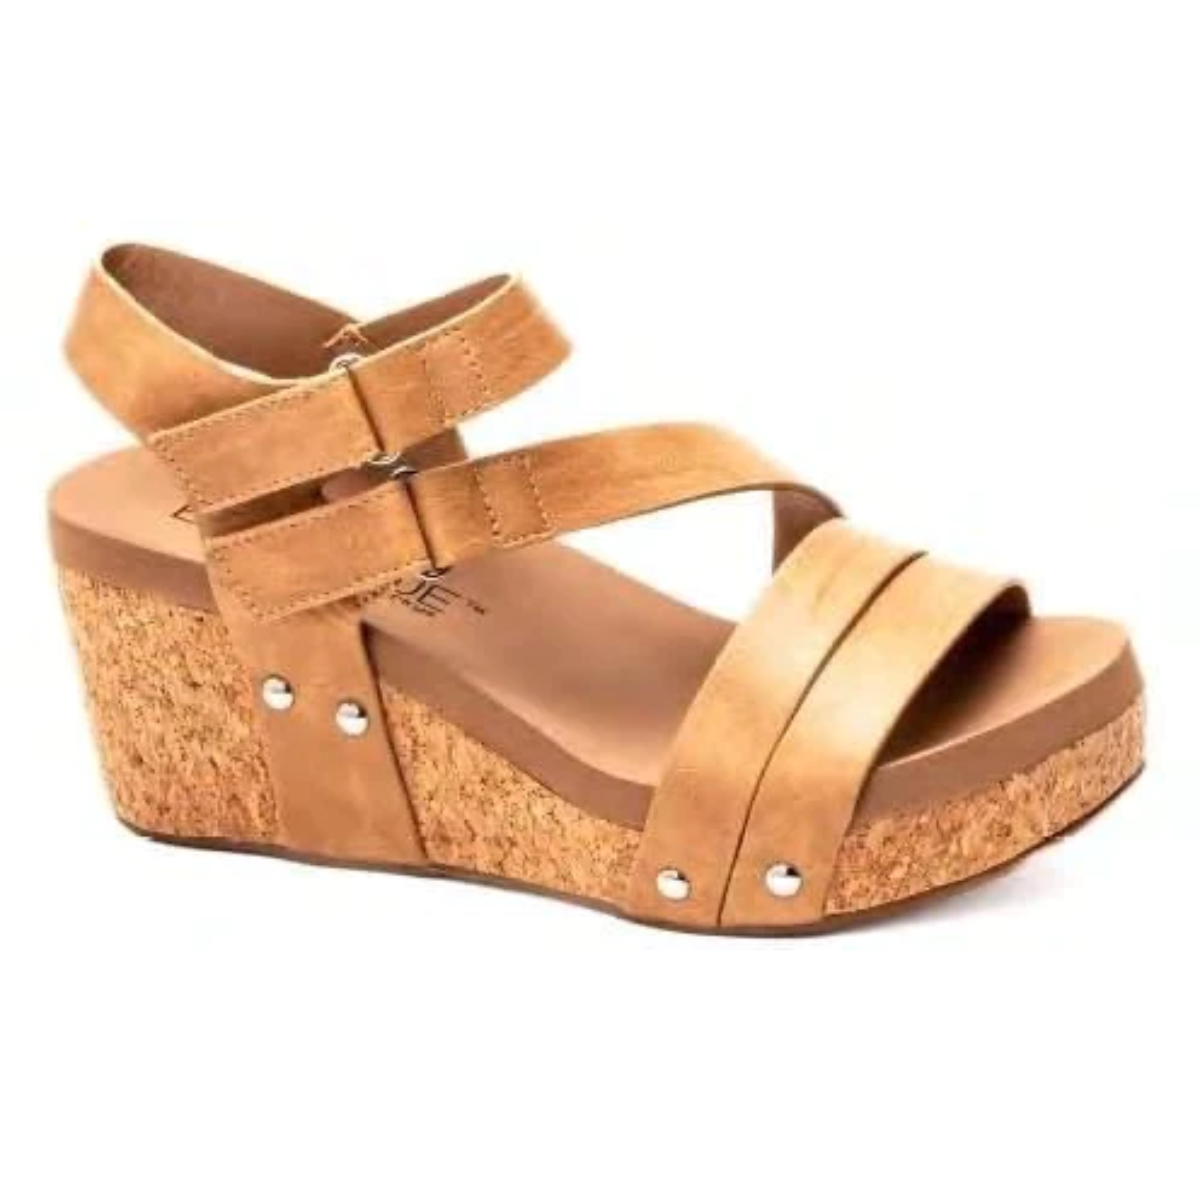 A women's Giggle in Caramel wedge sandal with two straps and a platform by Corky's Footwear Inc.